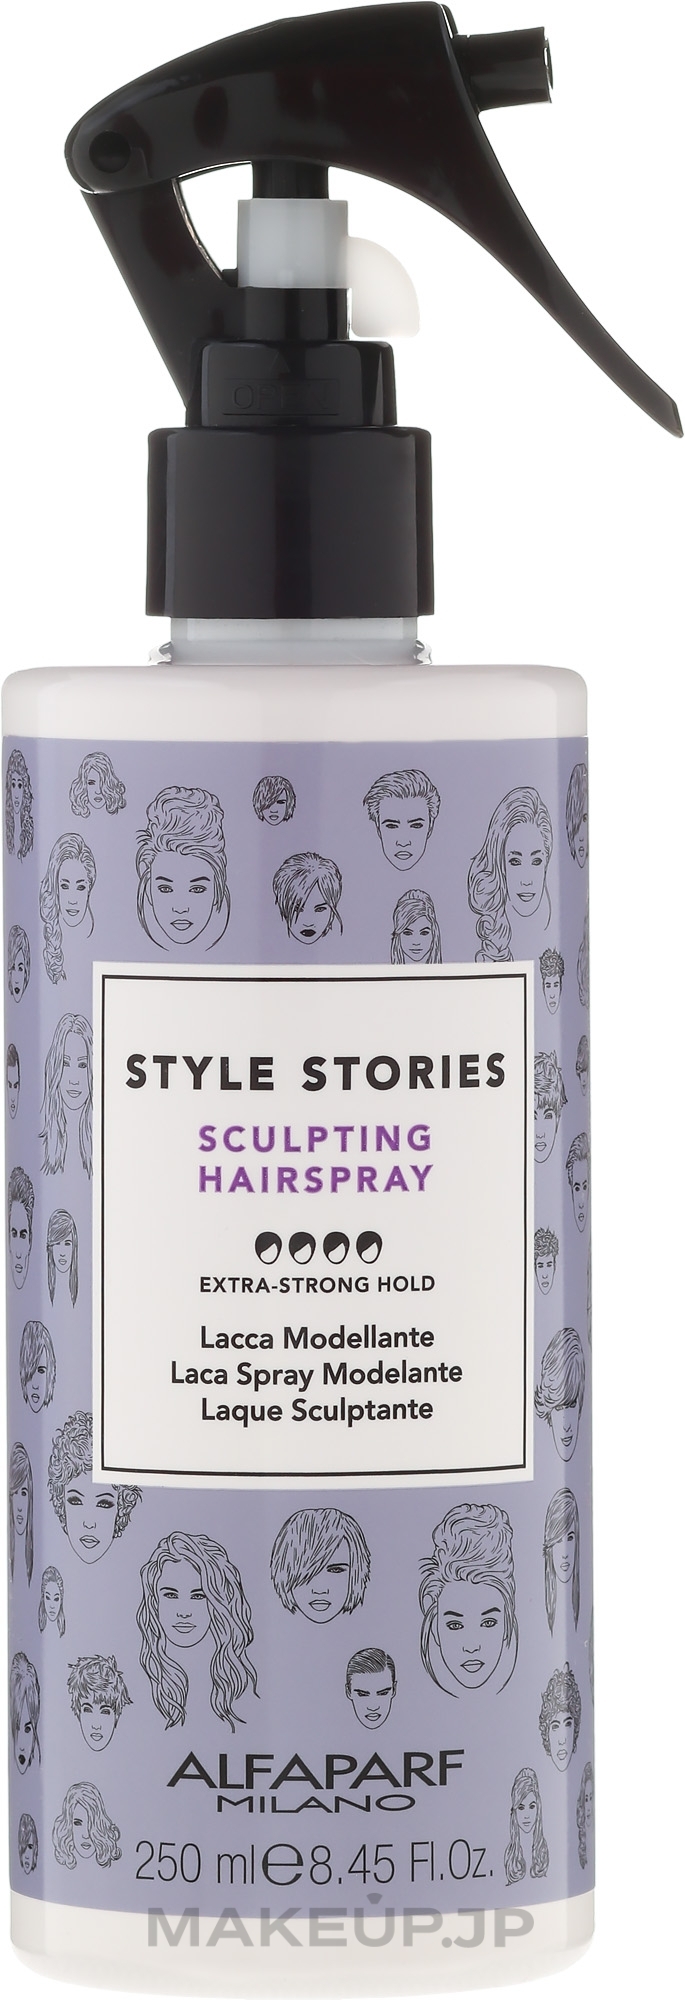 Extra Strong Hold Sculpting Spray - Alfaparf Milano Style Stories Sculpting Hairspray — photo 250 ml